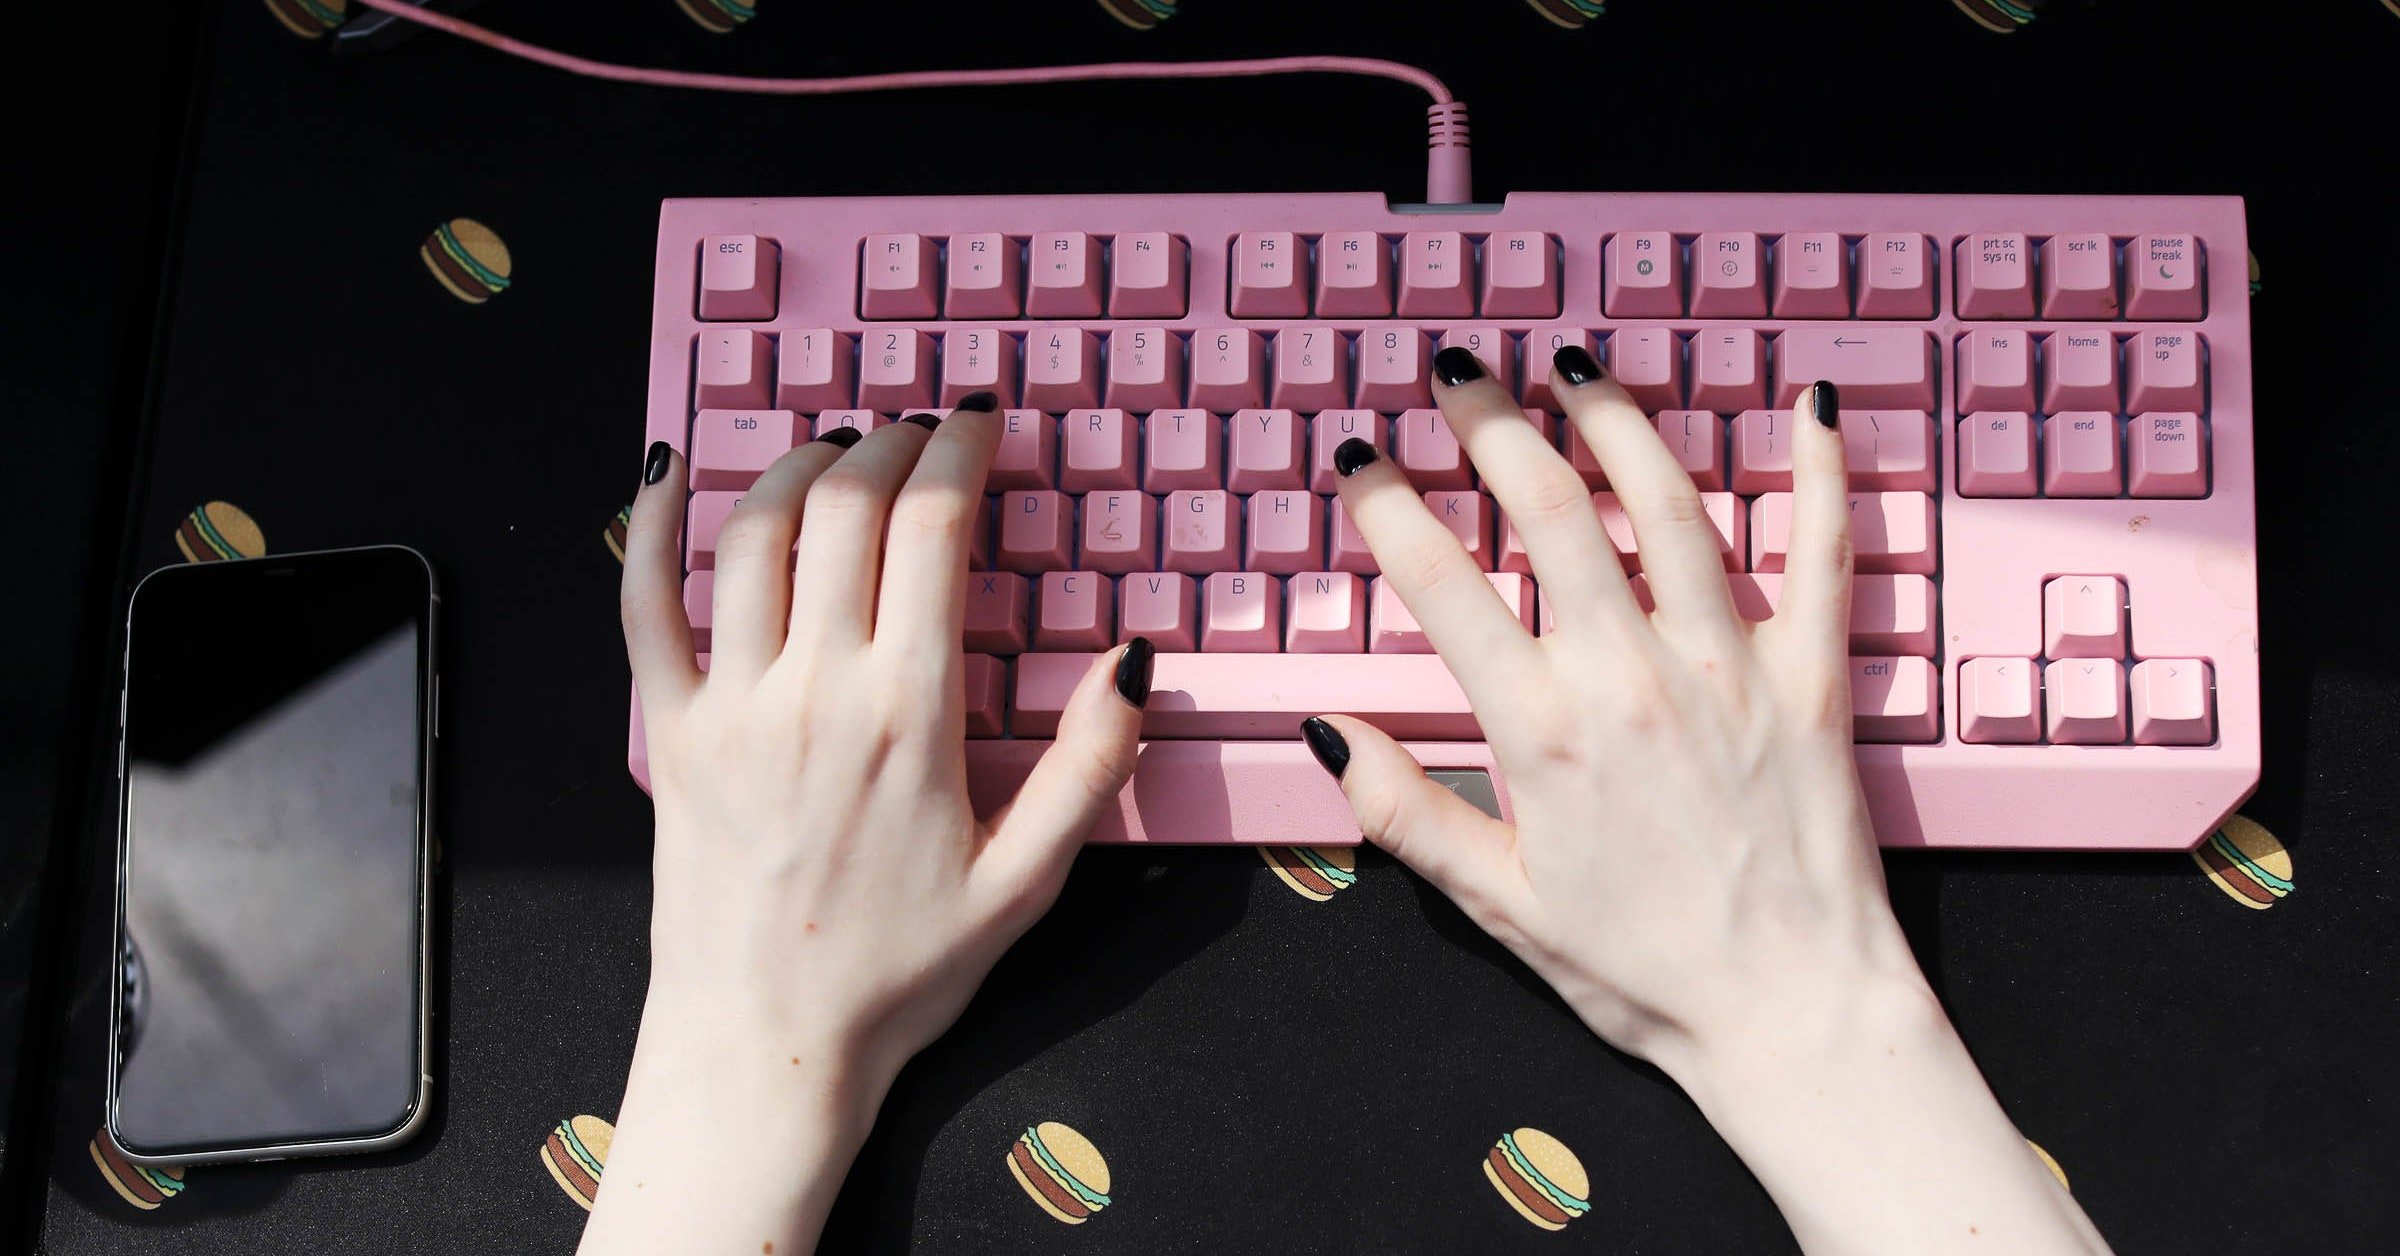 A New Site Connects 'Egirls' With Gamers—for a Fee